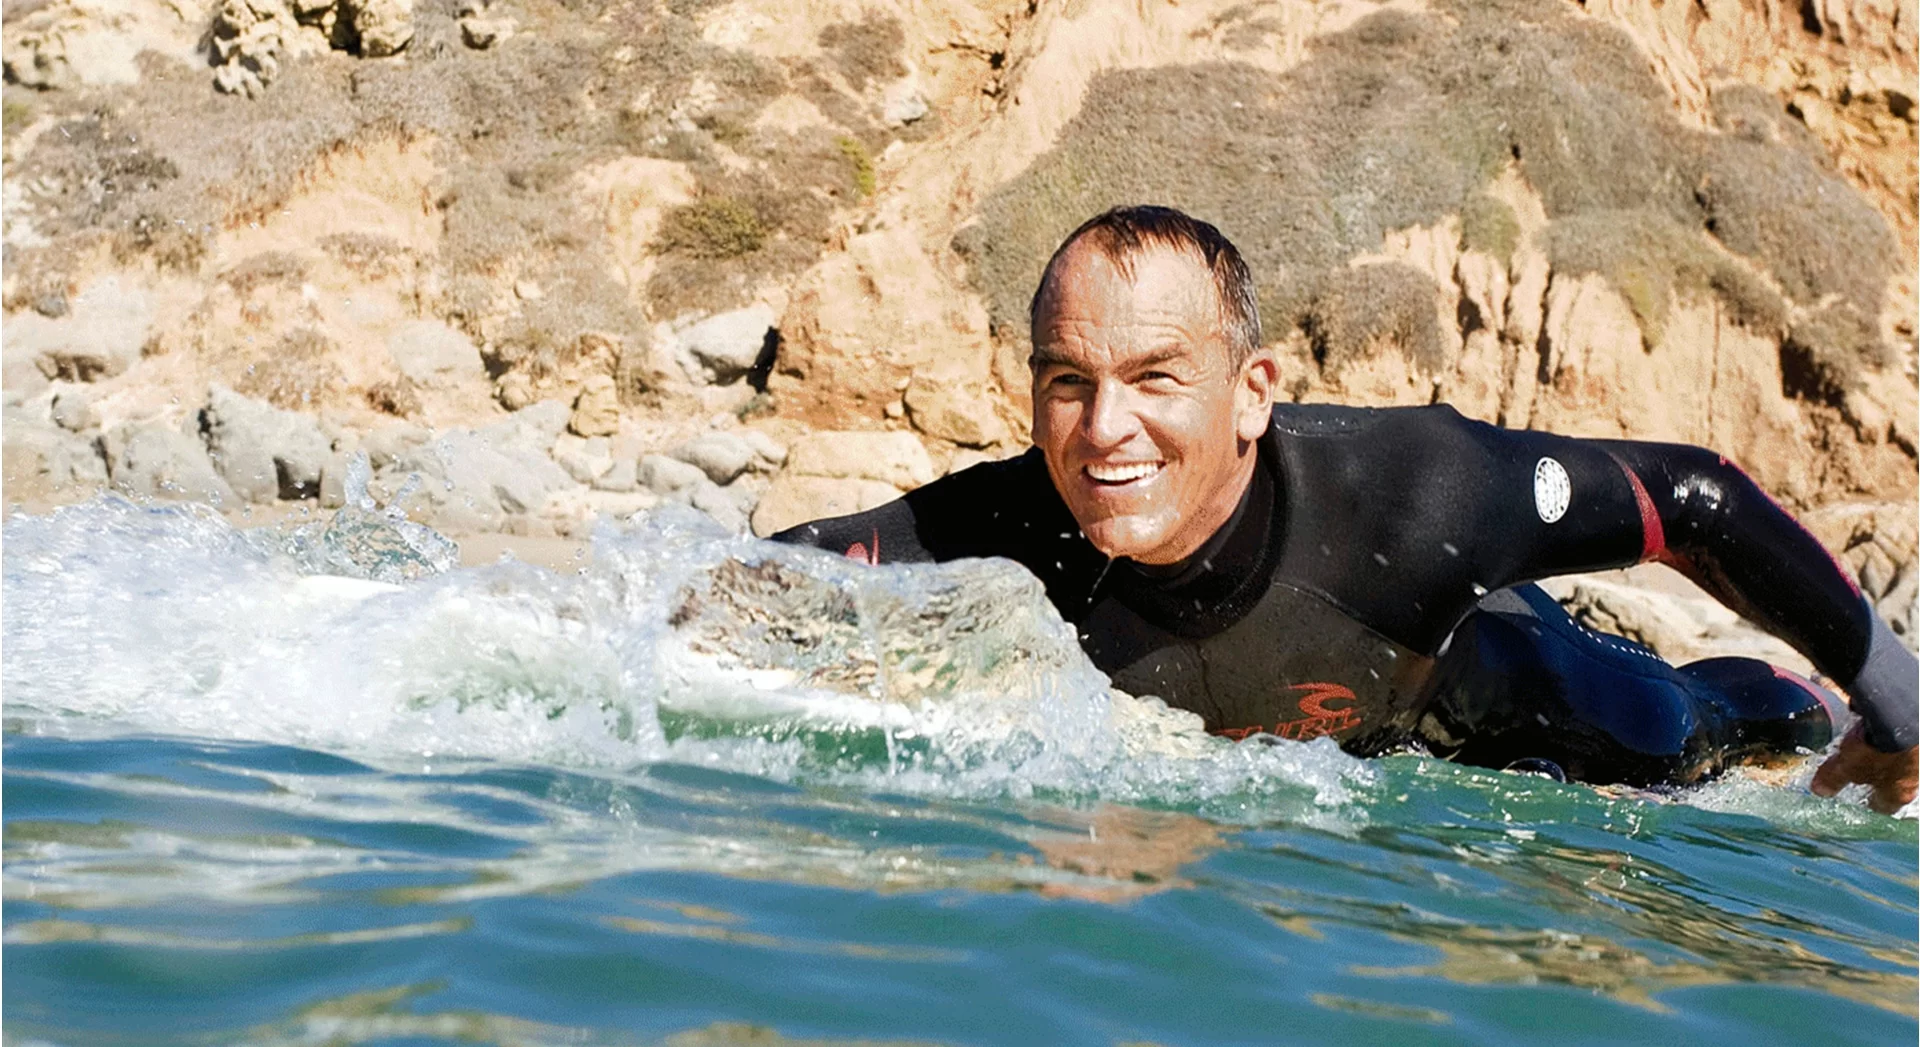 LifeFitness Hero Photo of well-aged man paddling out into water on surfboard, smiling.